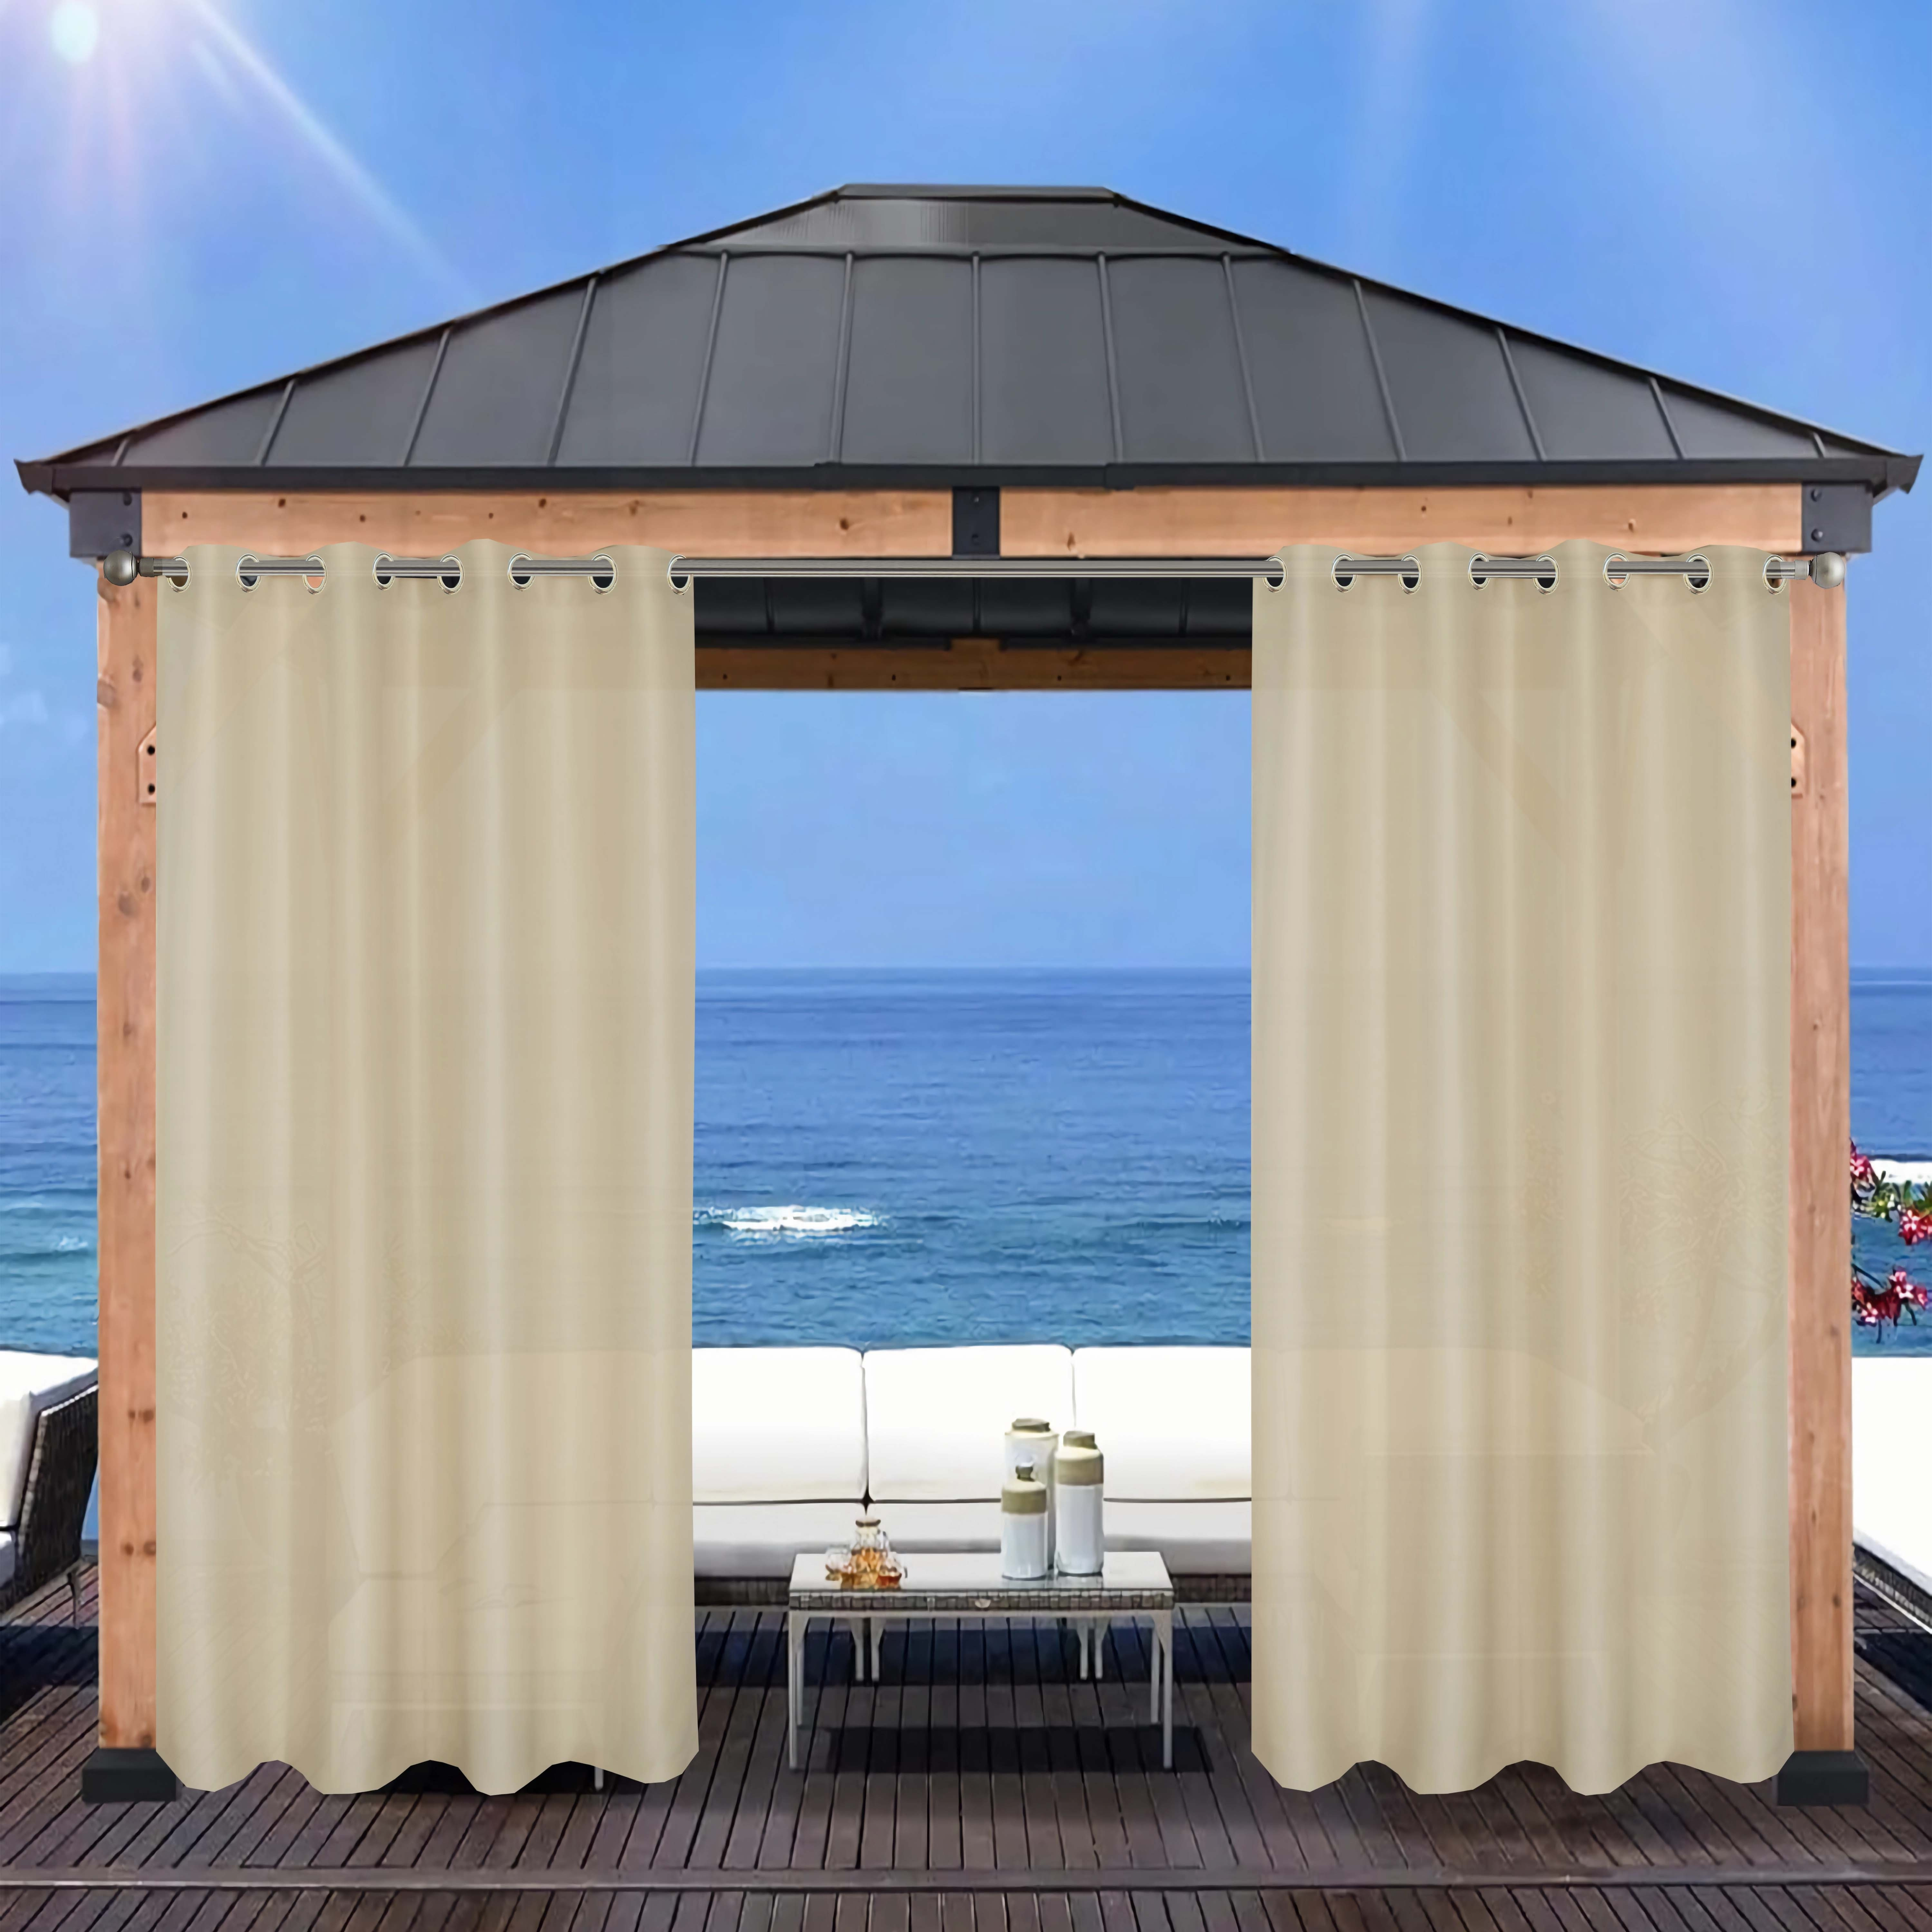 

1pc Indoor/outdoor Curtains, Waterproof Privacy Screen, Sun Blocking Textured Grommet Curtains For Patio, Pergola, Porch, Deck, Lanai, And Cabana